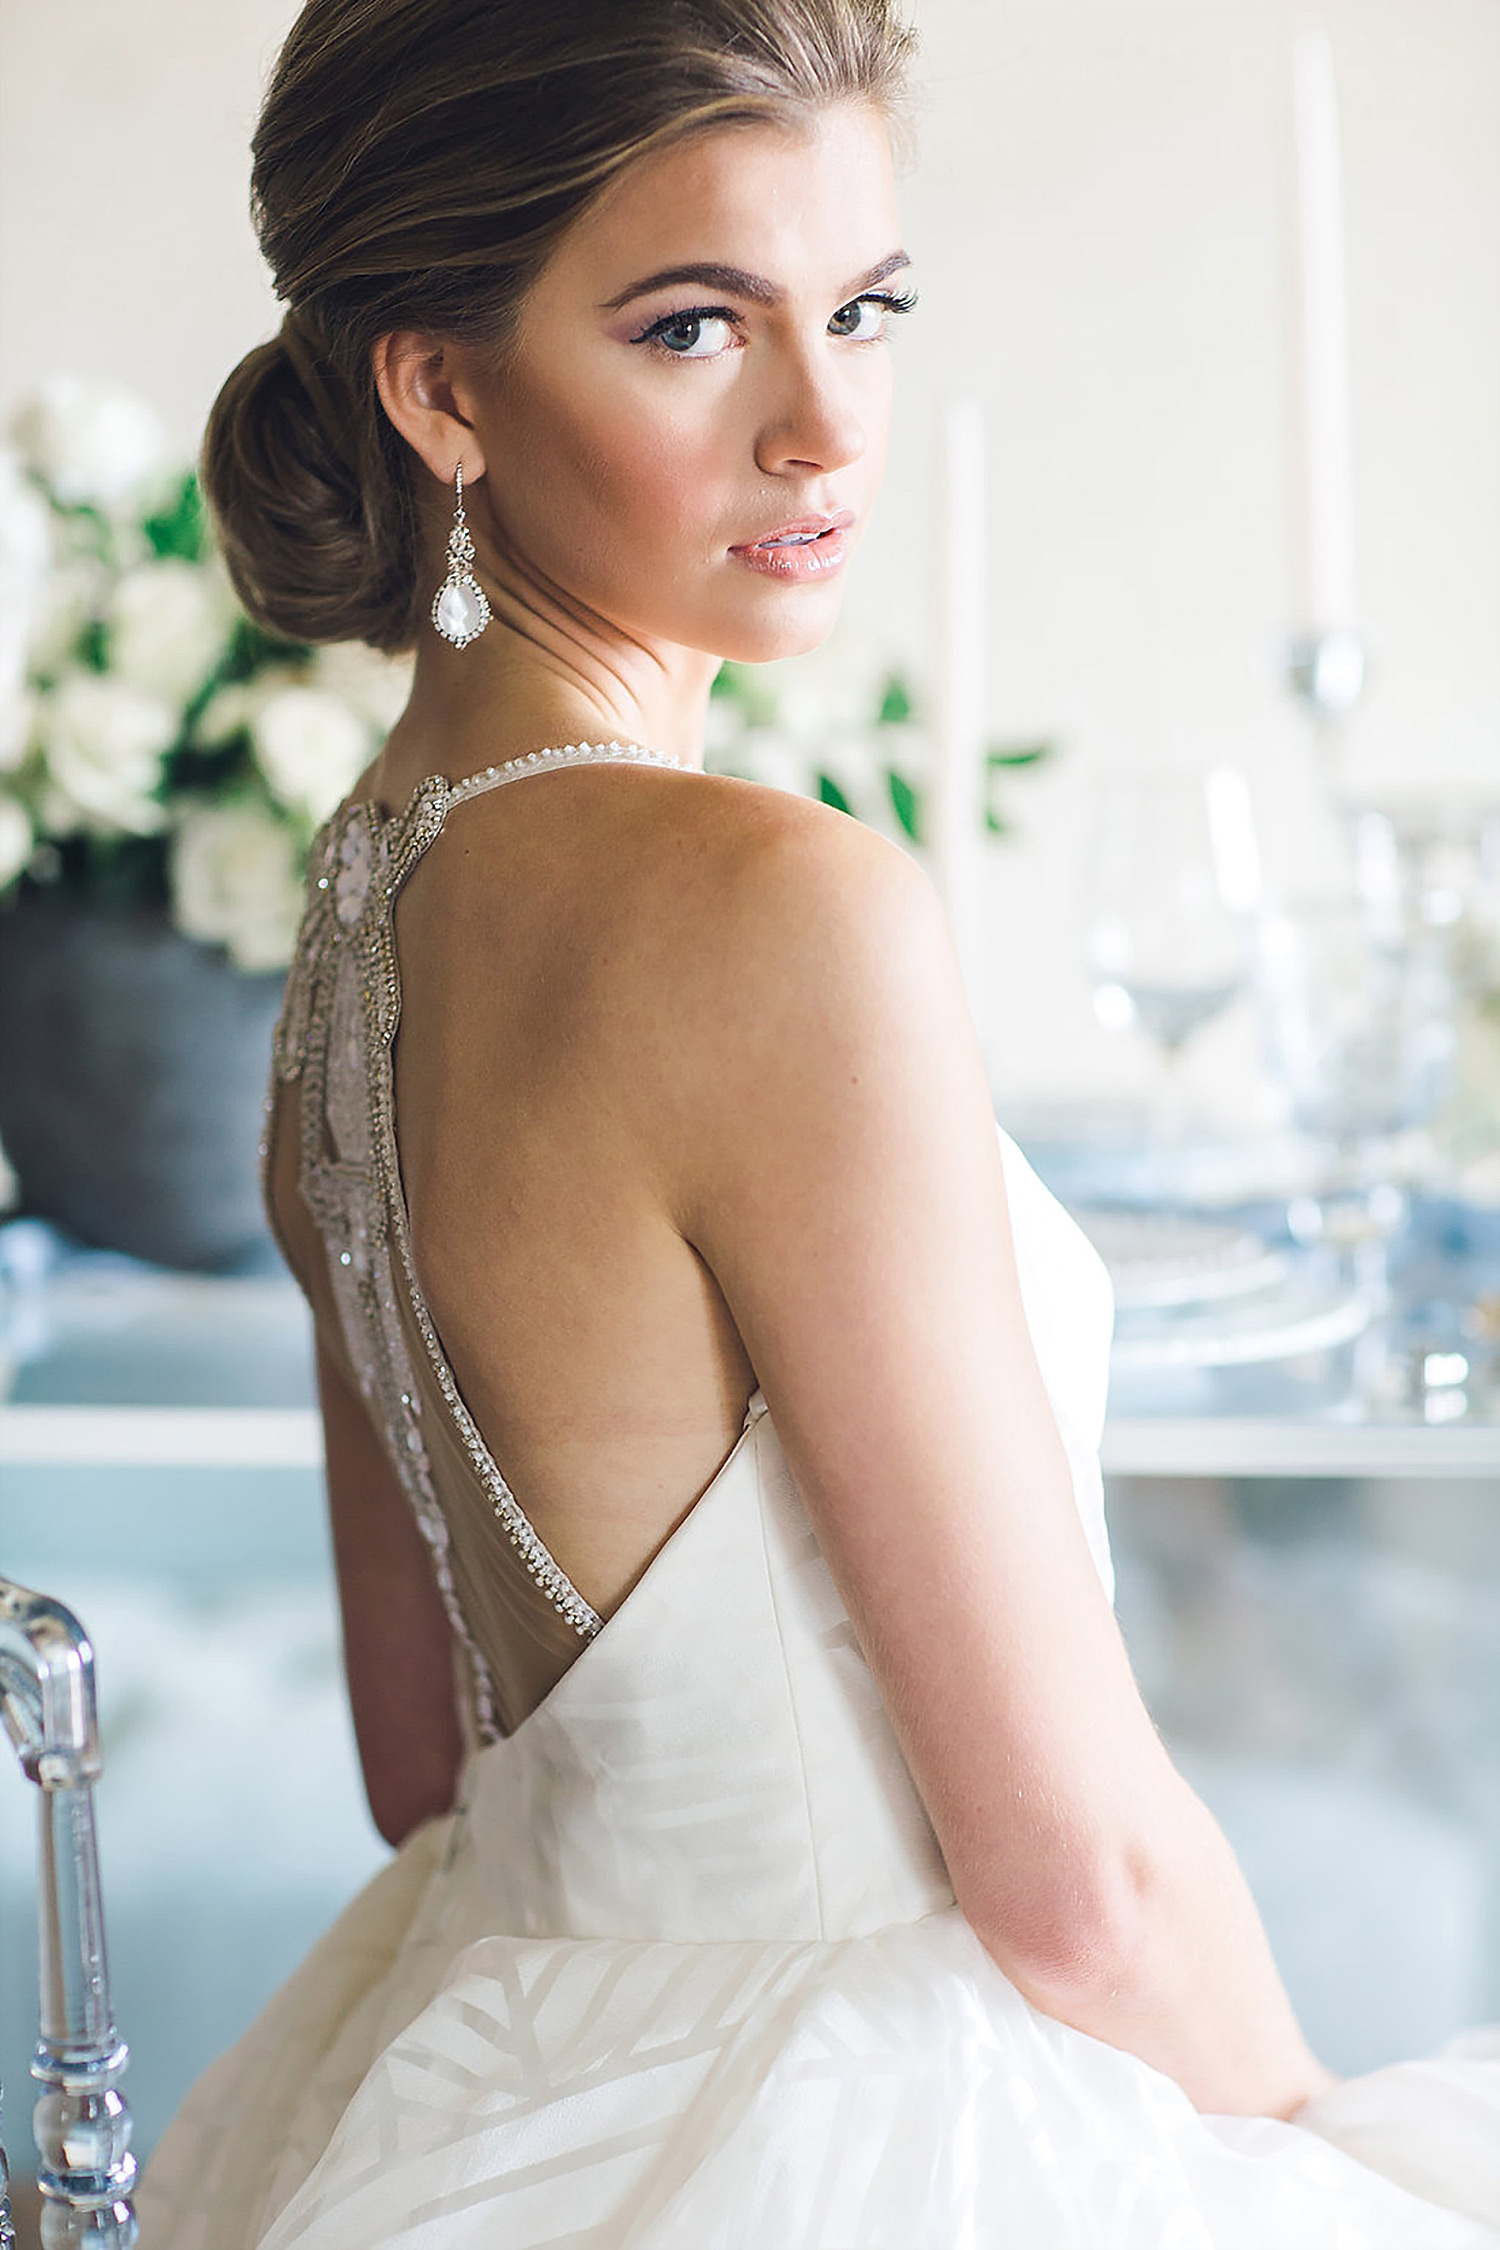 Bride wearing Haley Paige and Haute bride with a southern updo